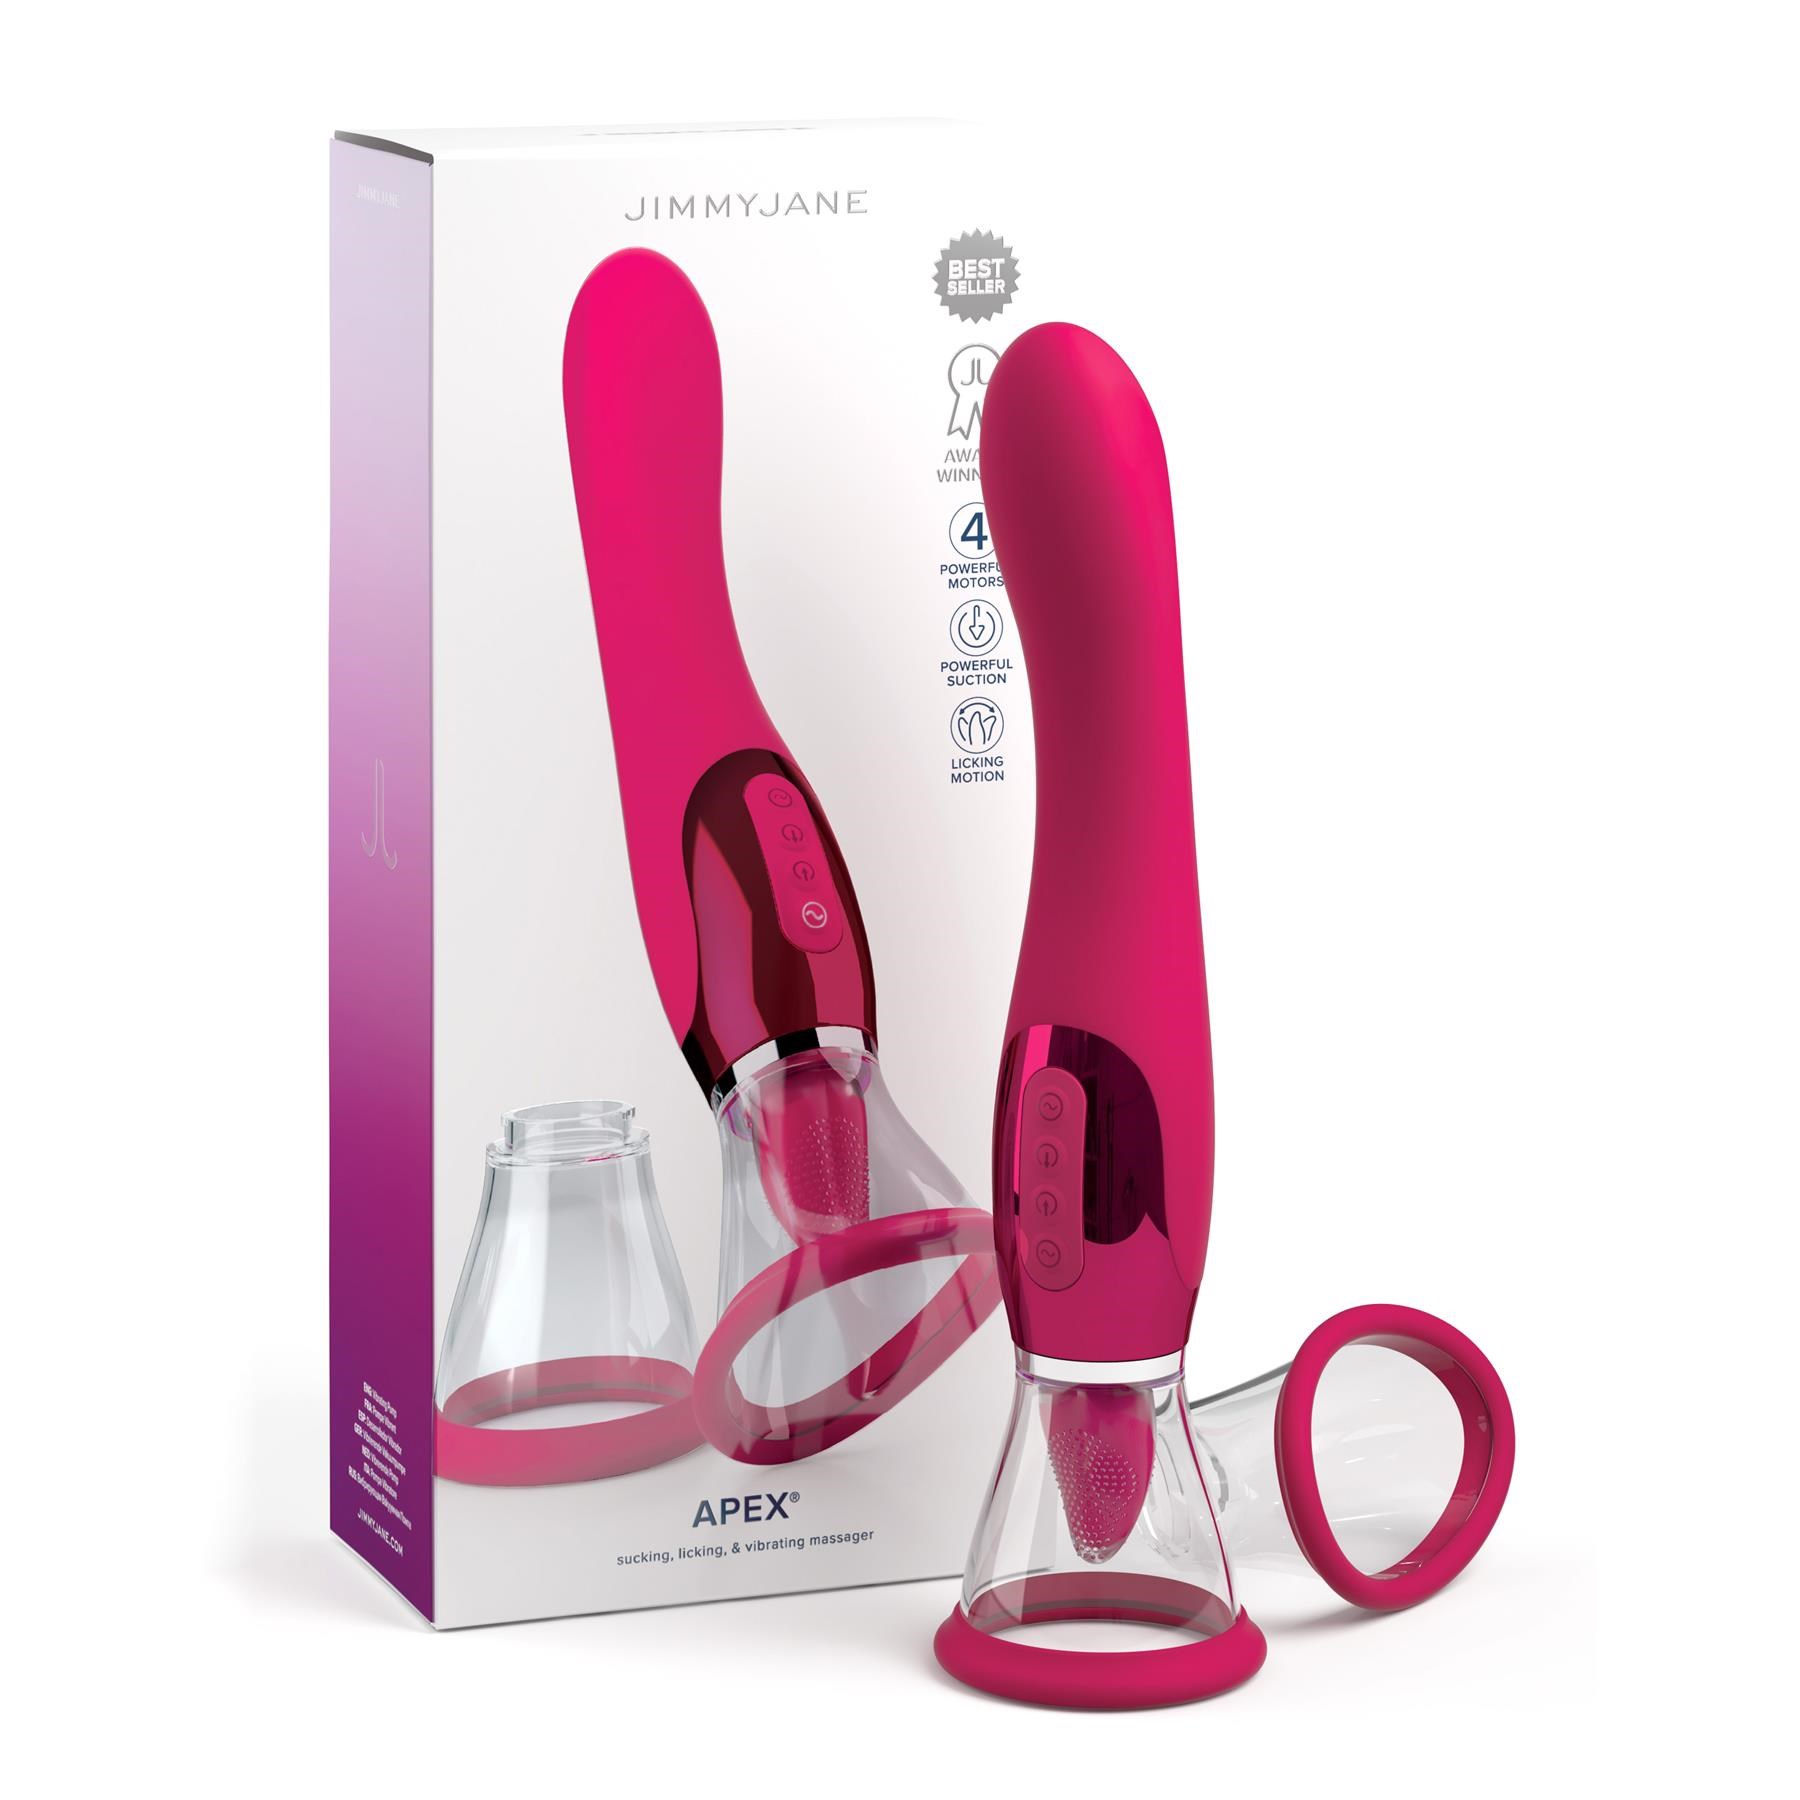 Jimmy Jane Apex Sucking, Licking and Vibrating Pussy Pump - Product and Packaging